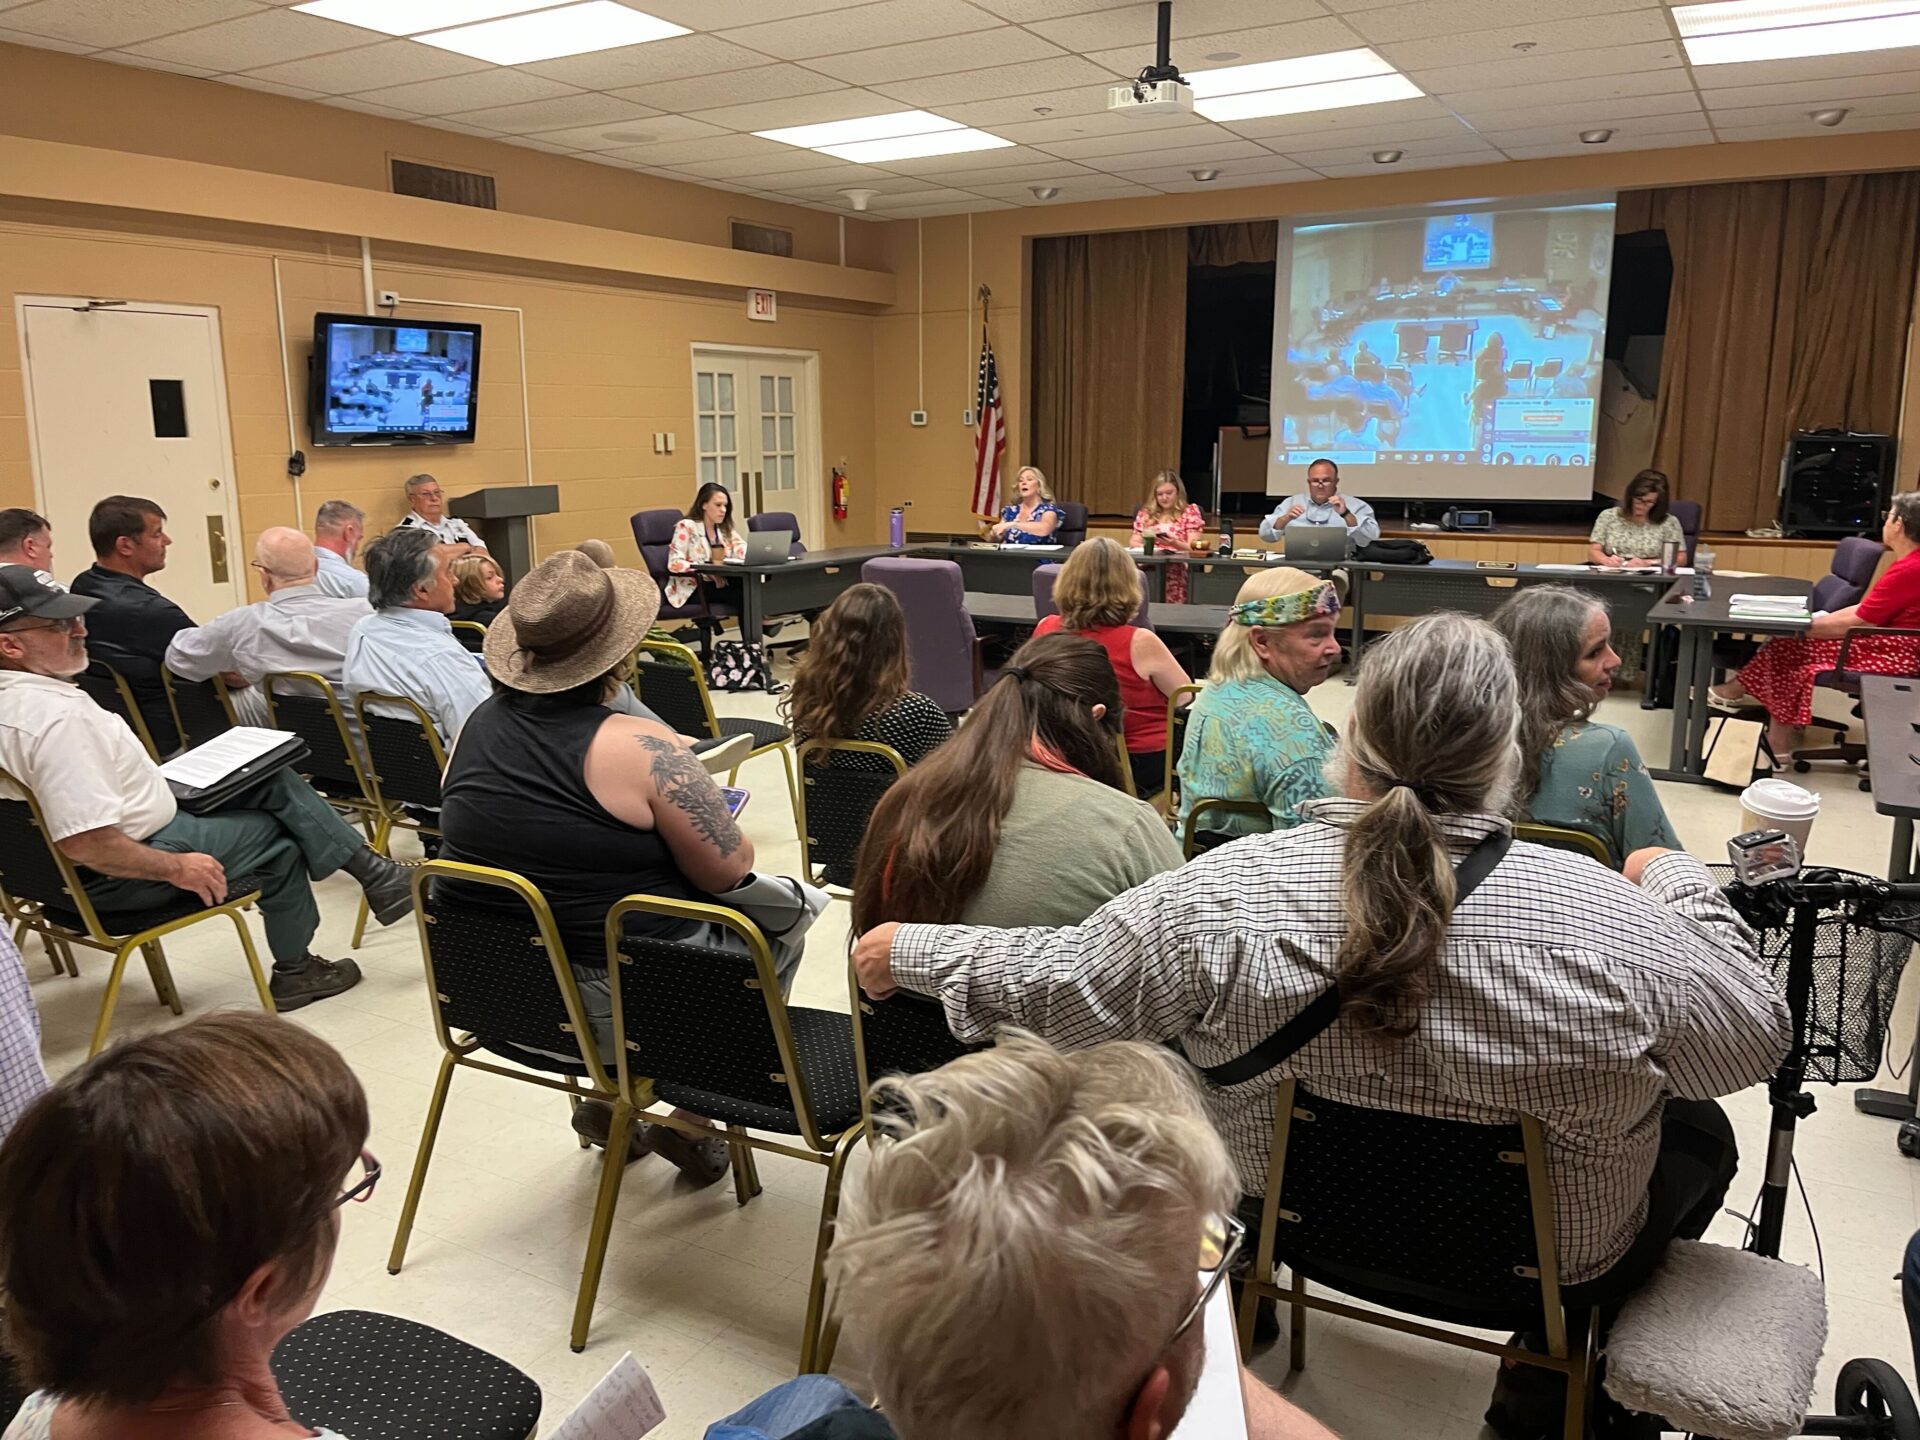 Jefferson County Residents Concerned ‘Adult Live Performance’ Ordinance Targets LGBTQ People